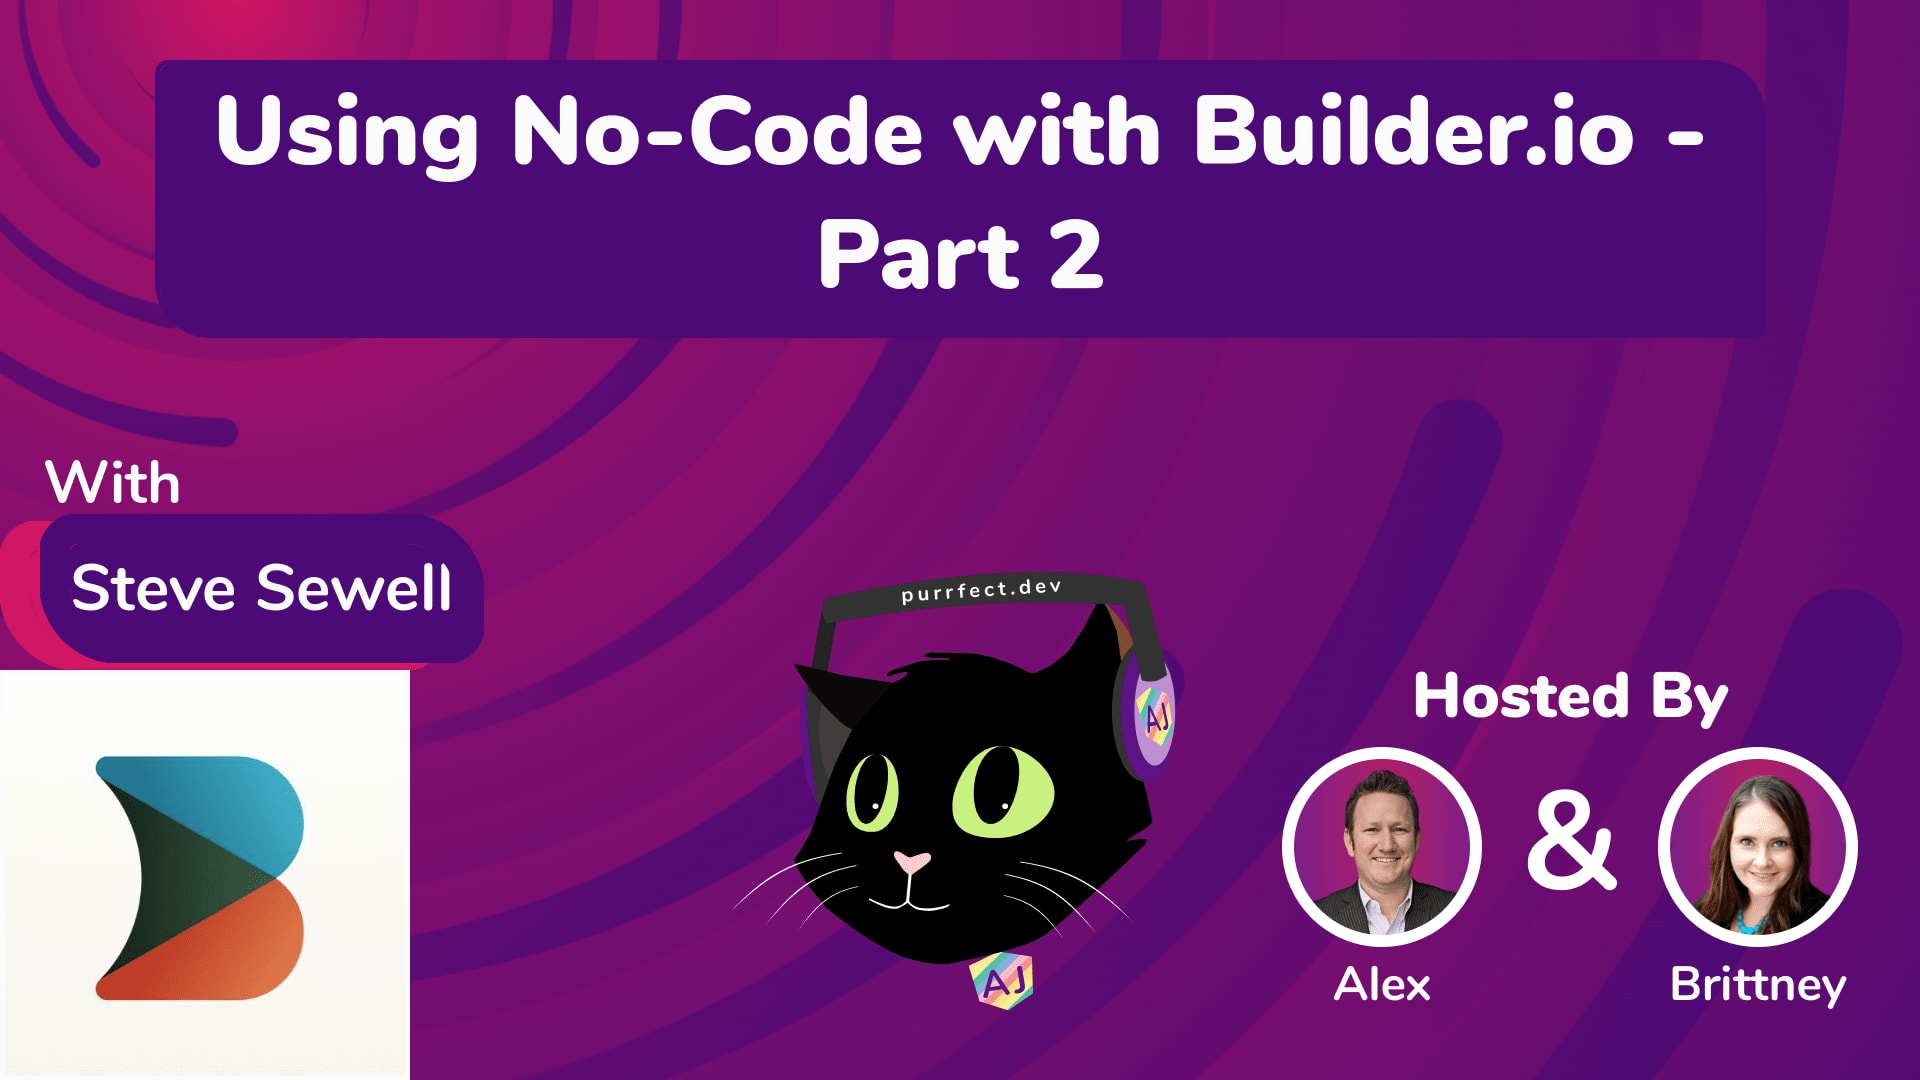 2.2 - Using No-Code with Builder - Part 2